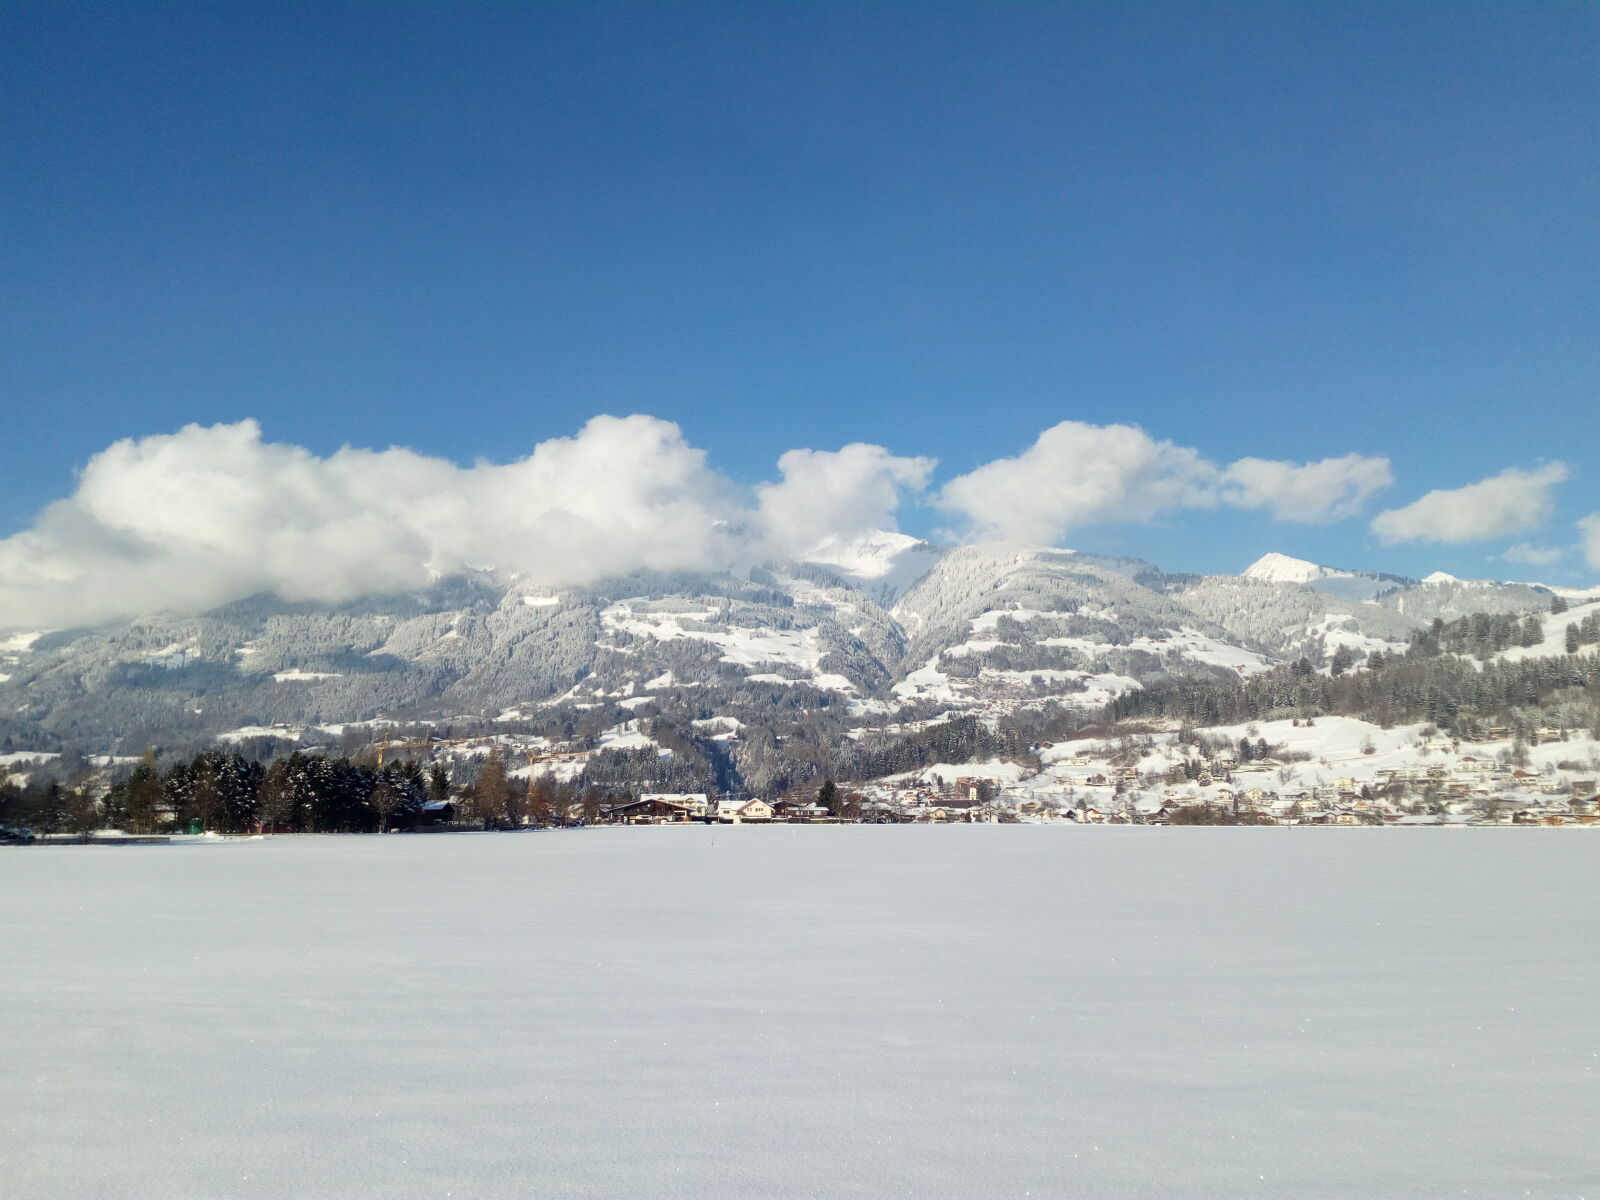 HUAWEI Honor 5A sample photo. Clouds, mountains, snow, village photography